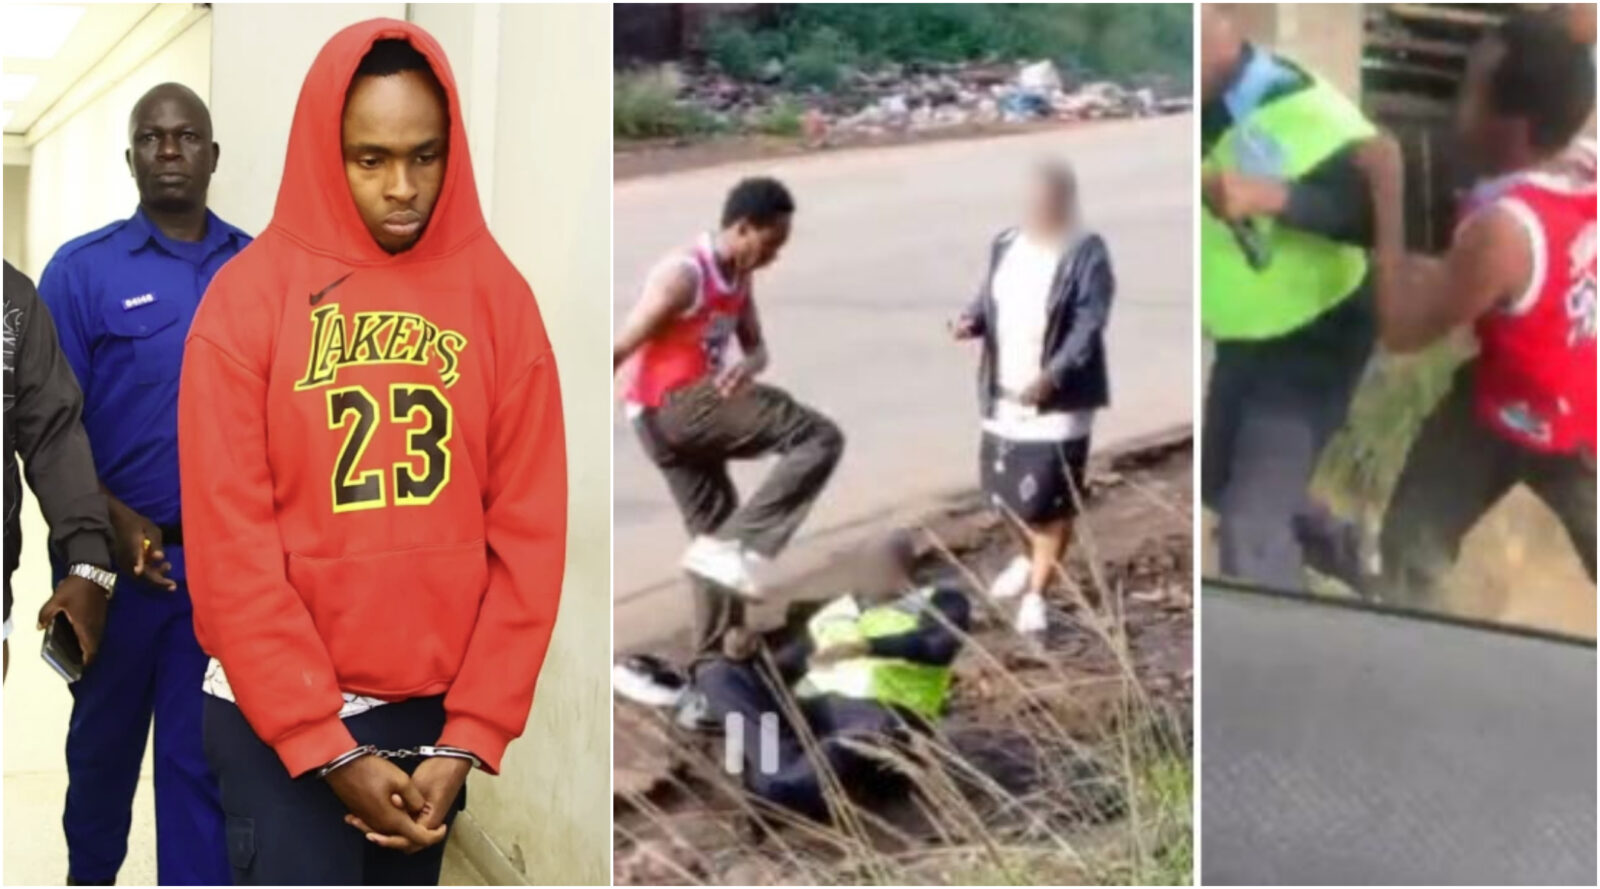 Ian Njoroge charged with robbery with violence, assault and resisting arrest